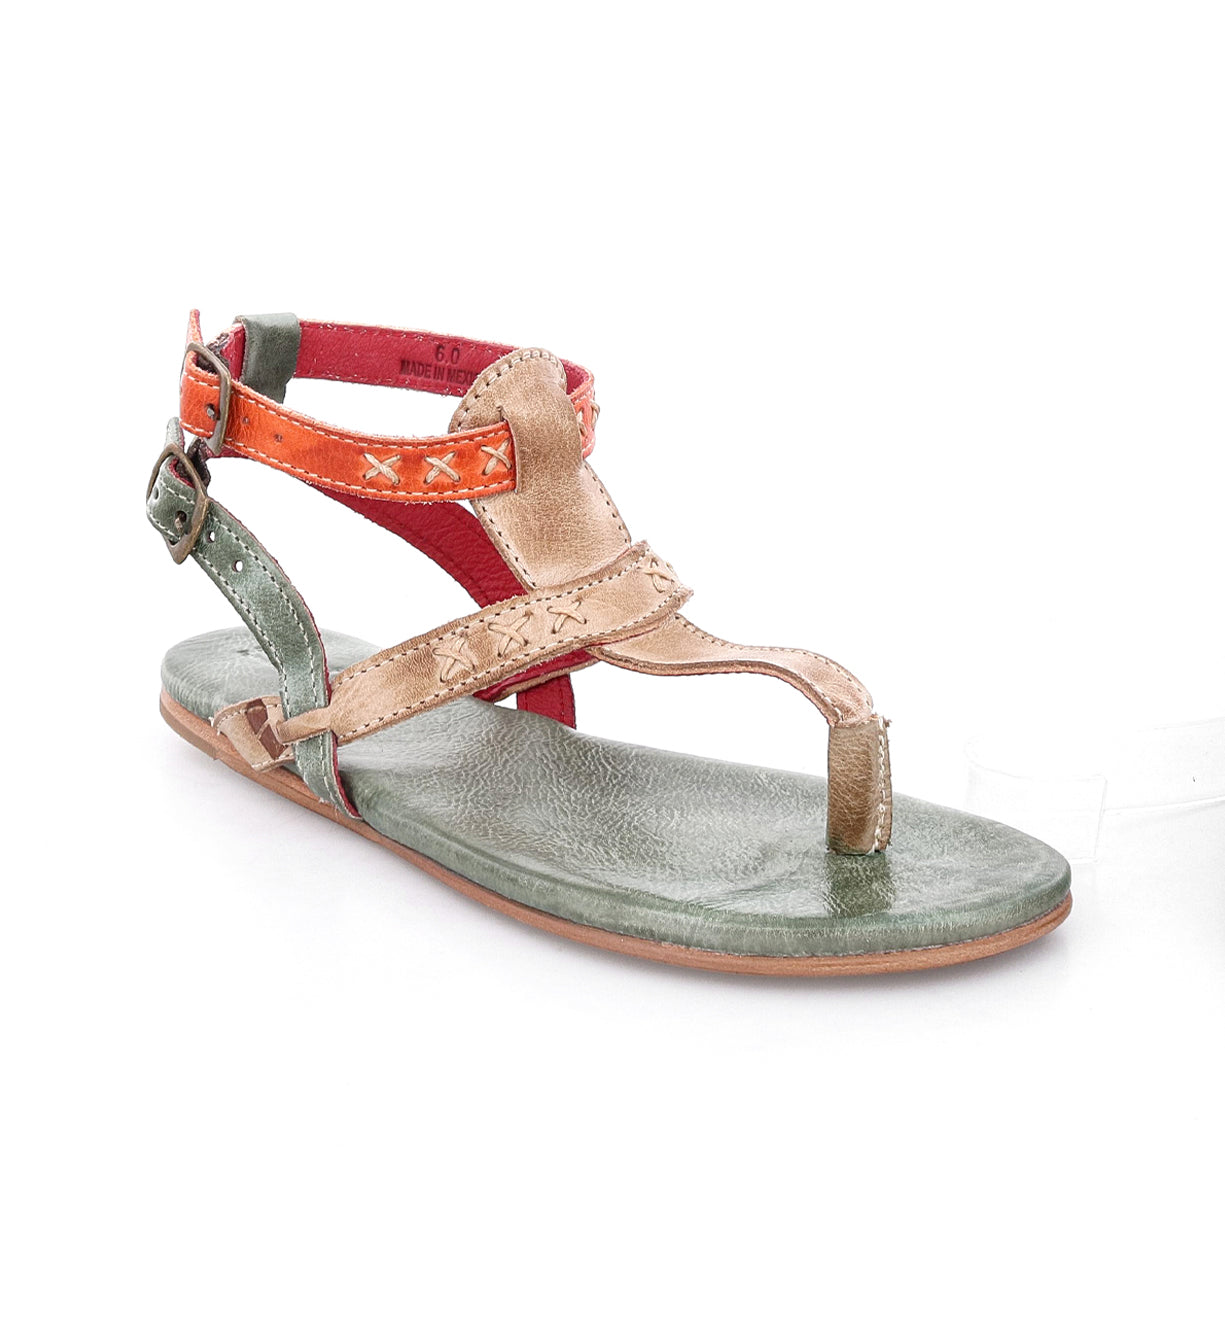 A women's green and orange Moon sandal with straps by Bed Stu.